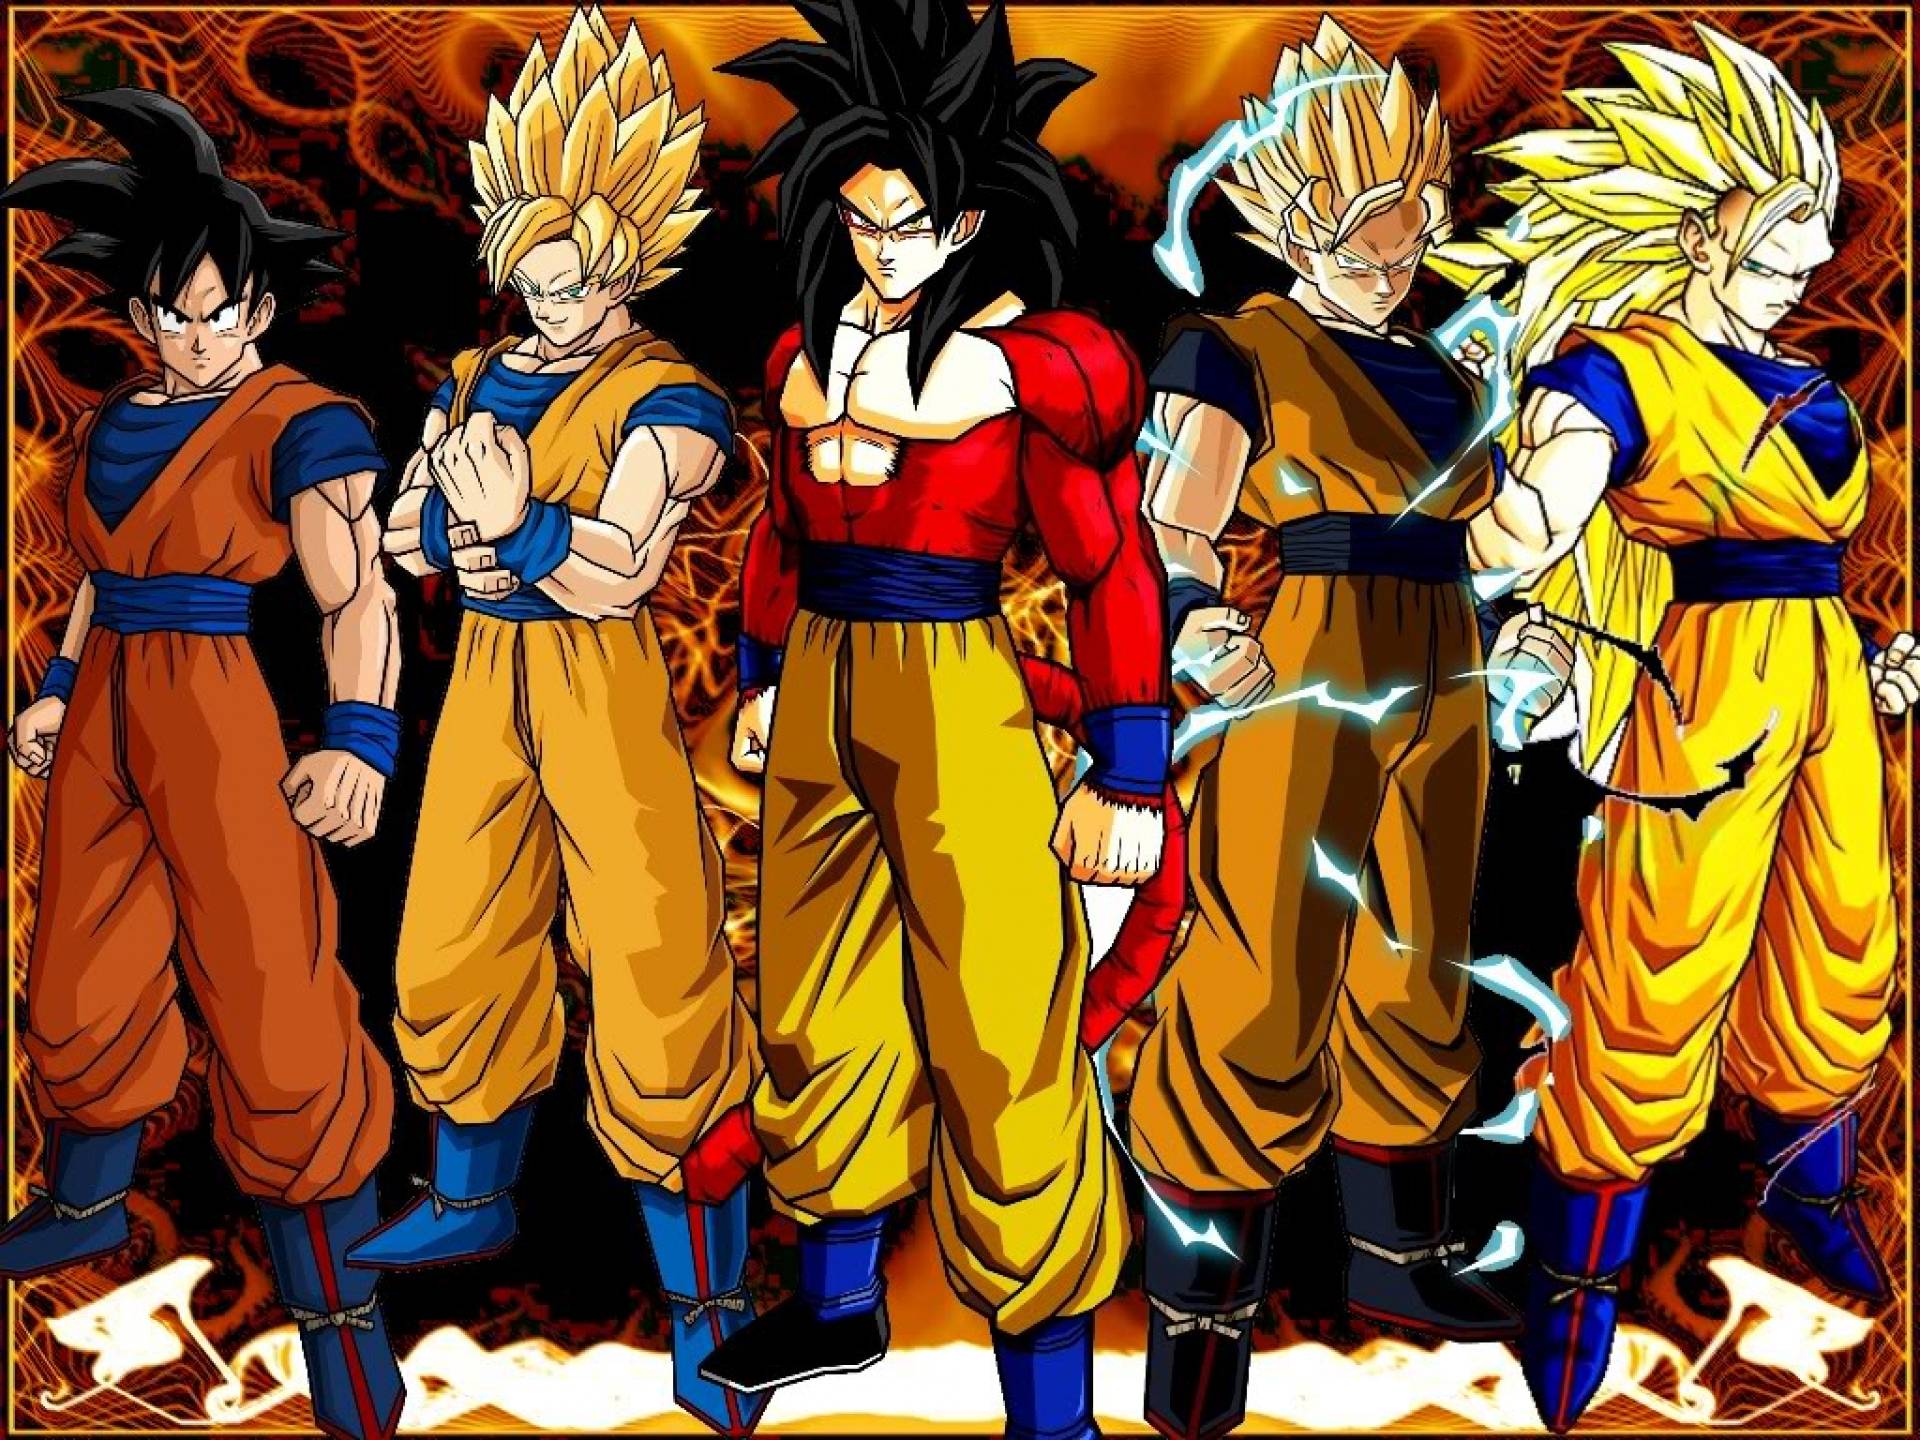 Dragonball Z Wallpapers X Cartoons Picture Dragon Ball Z Hd Wallpapers.